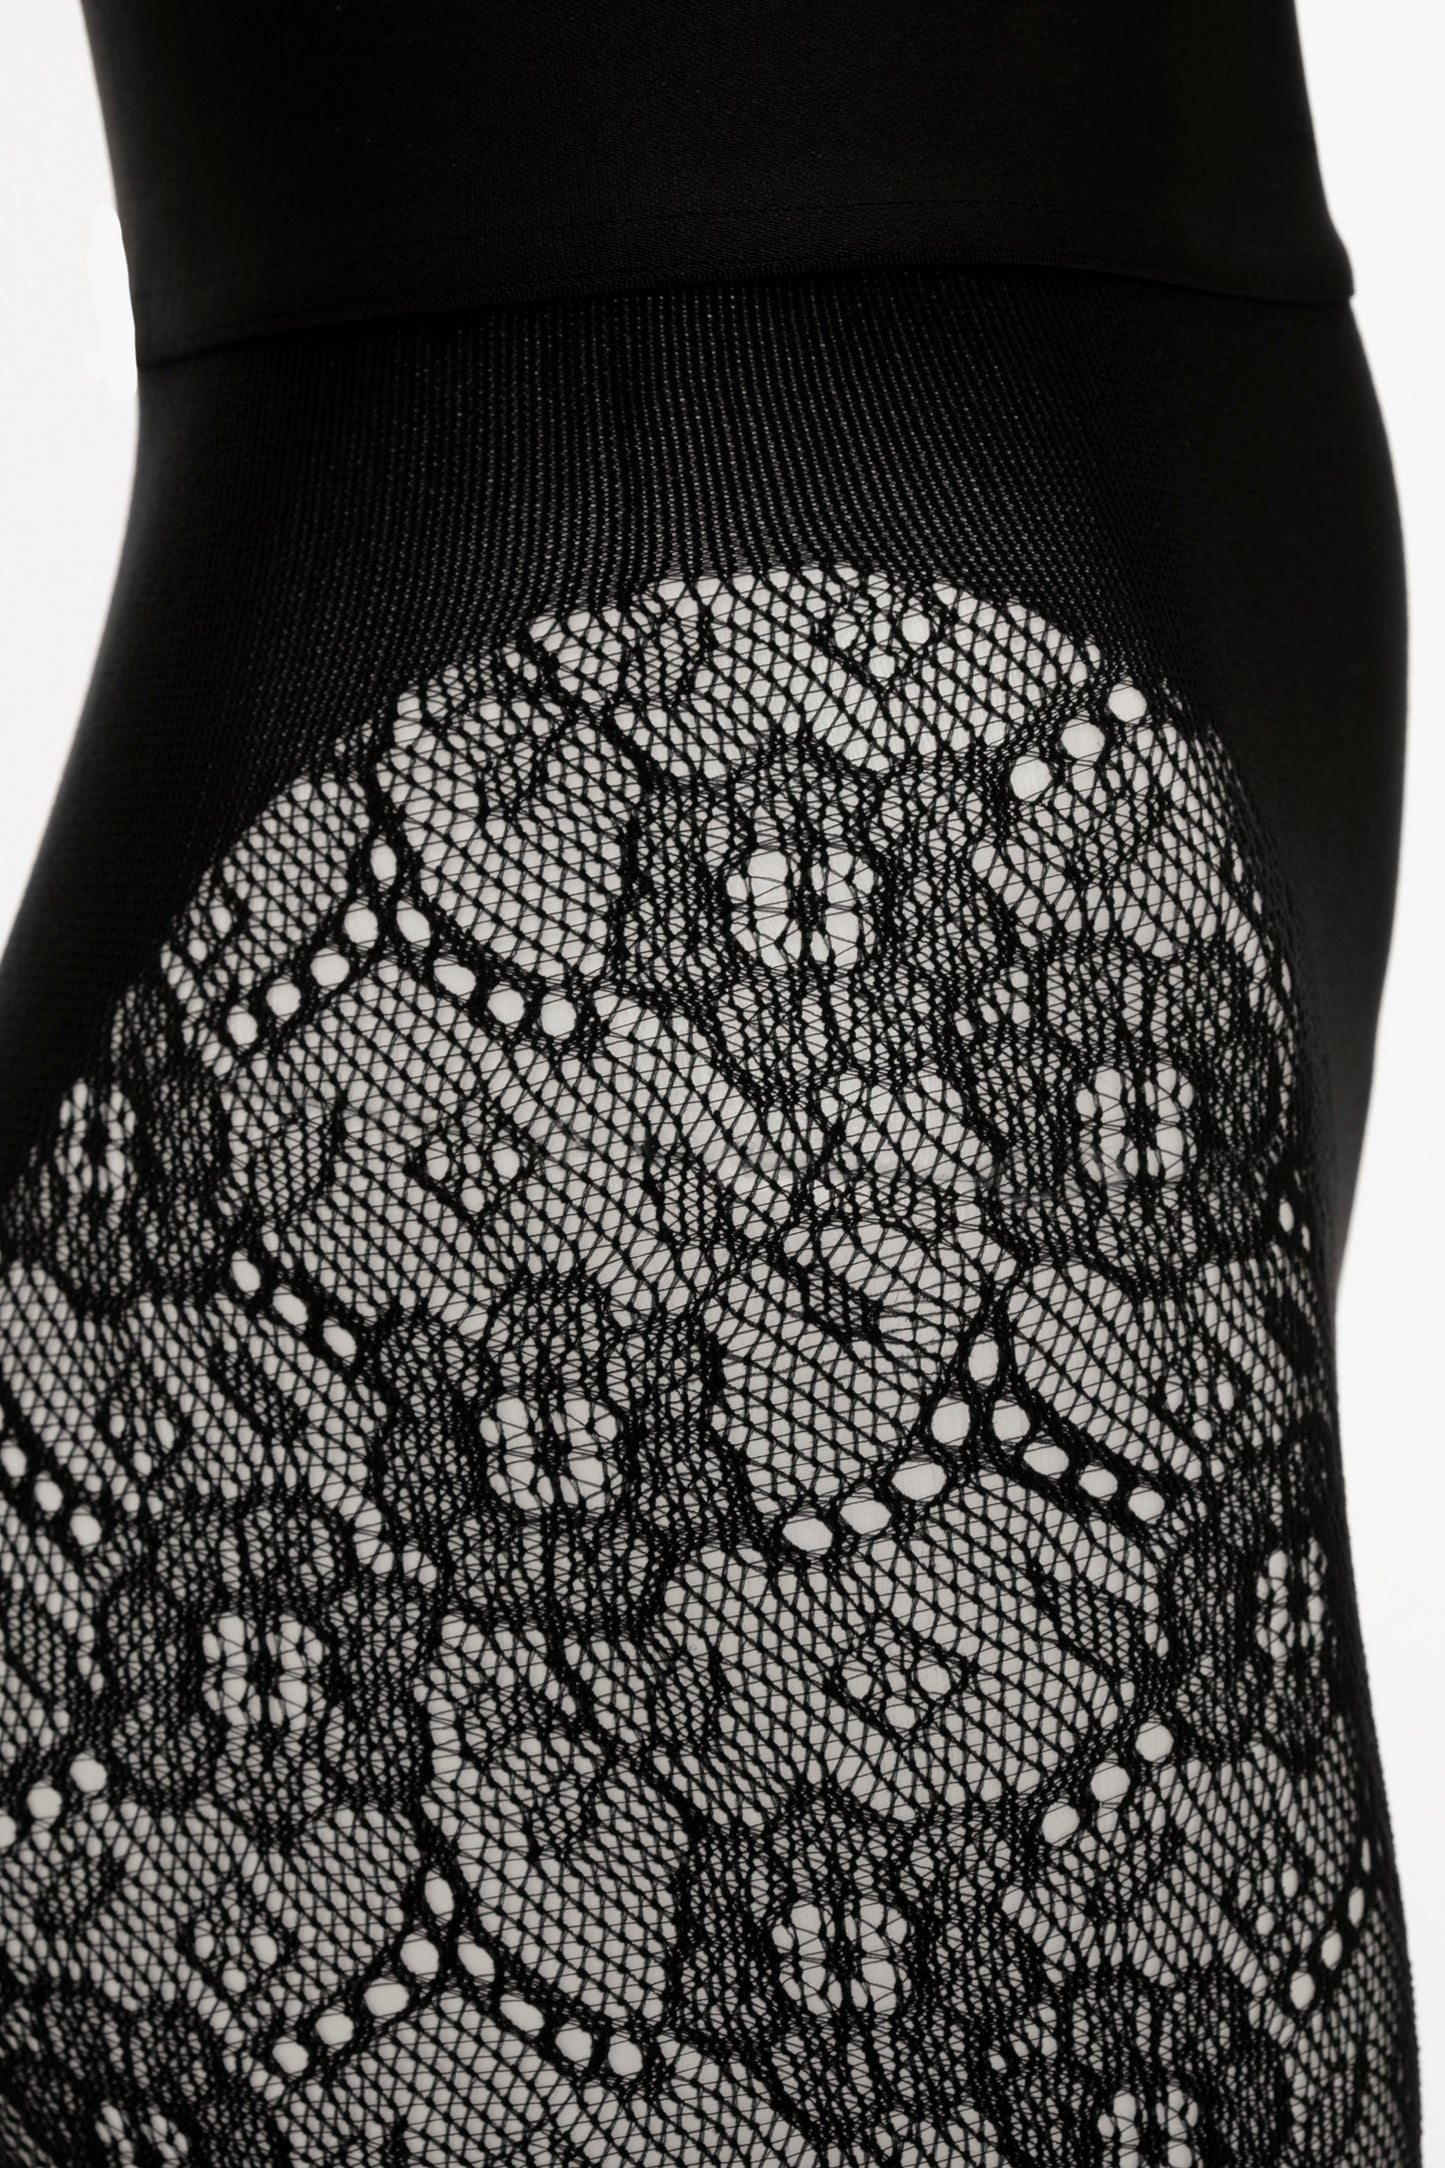 Exclusive VB Monogram Lace Tights In Black